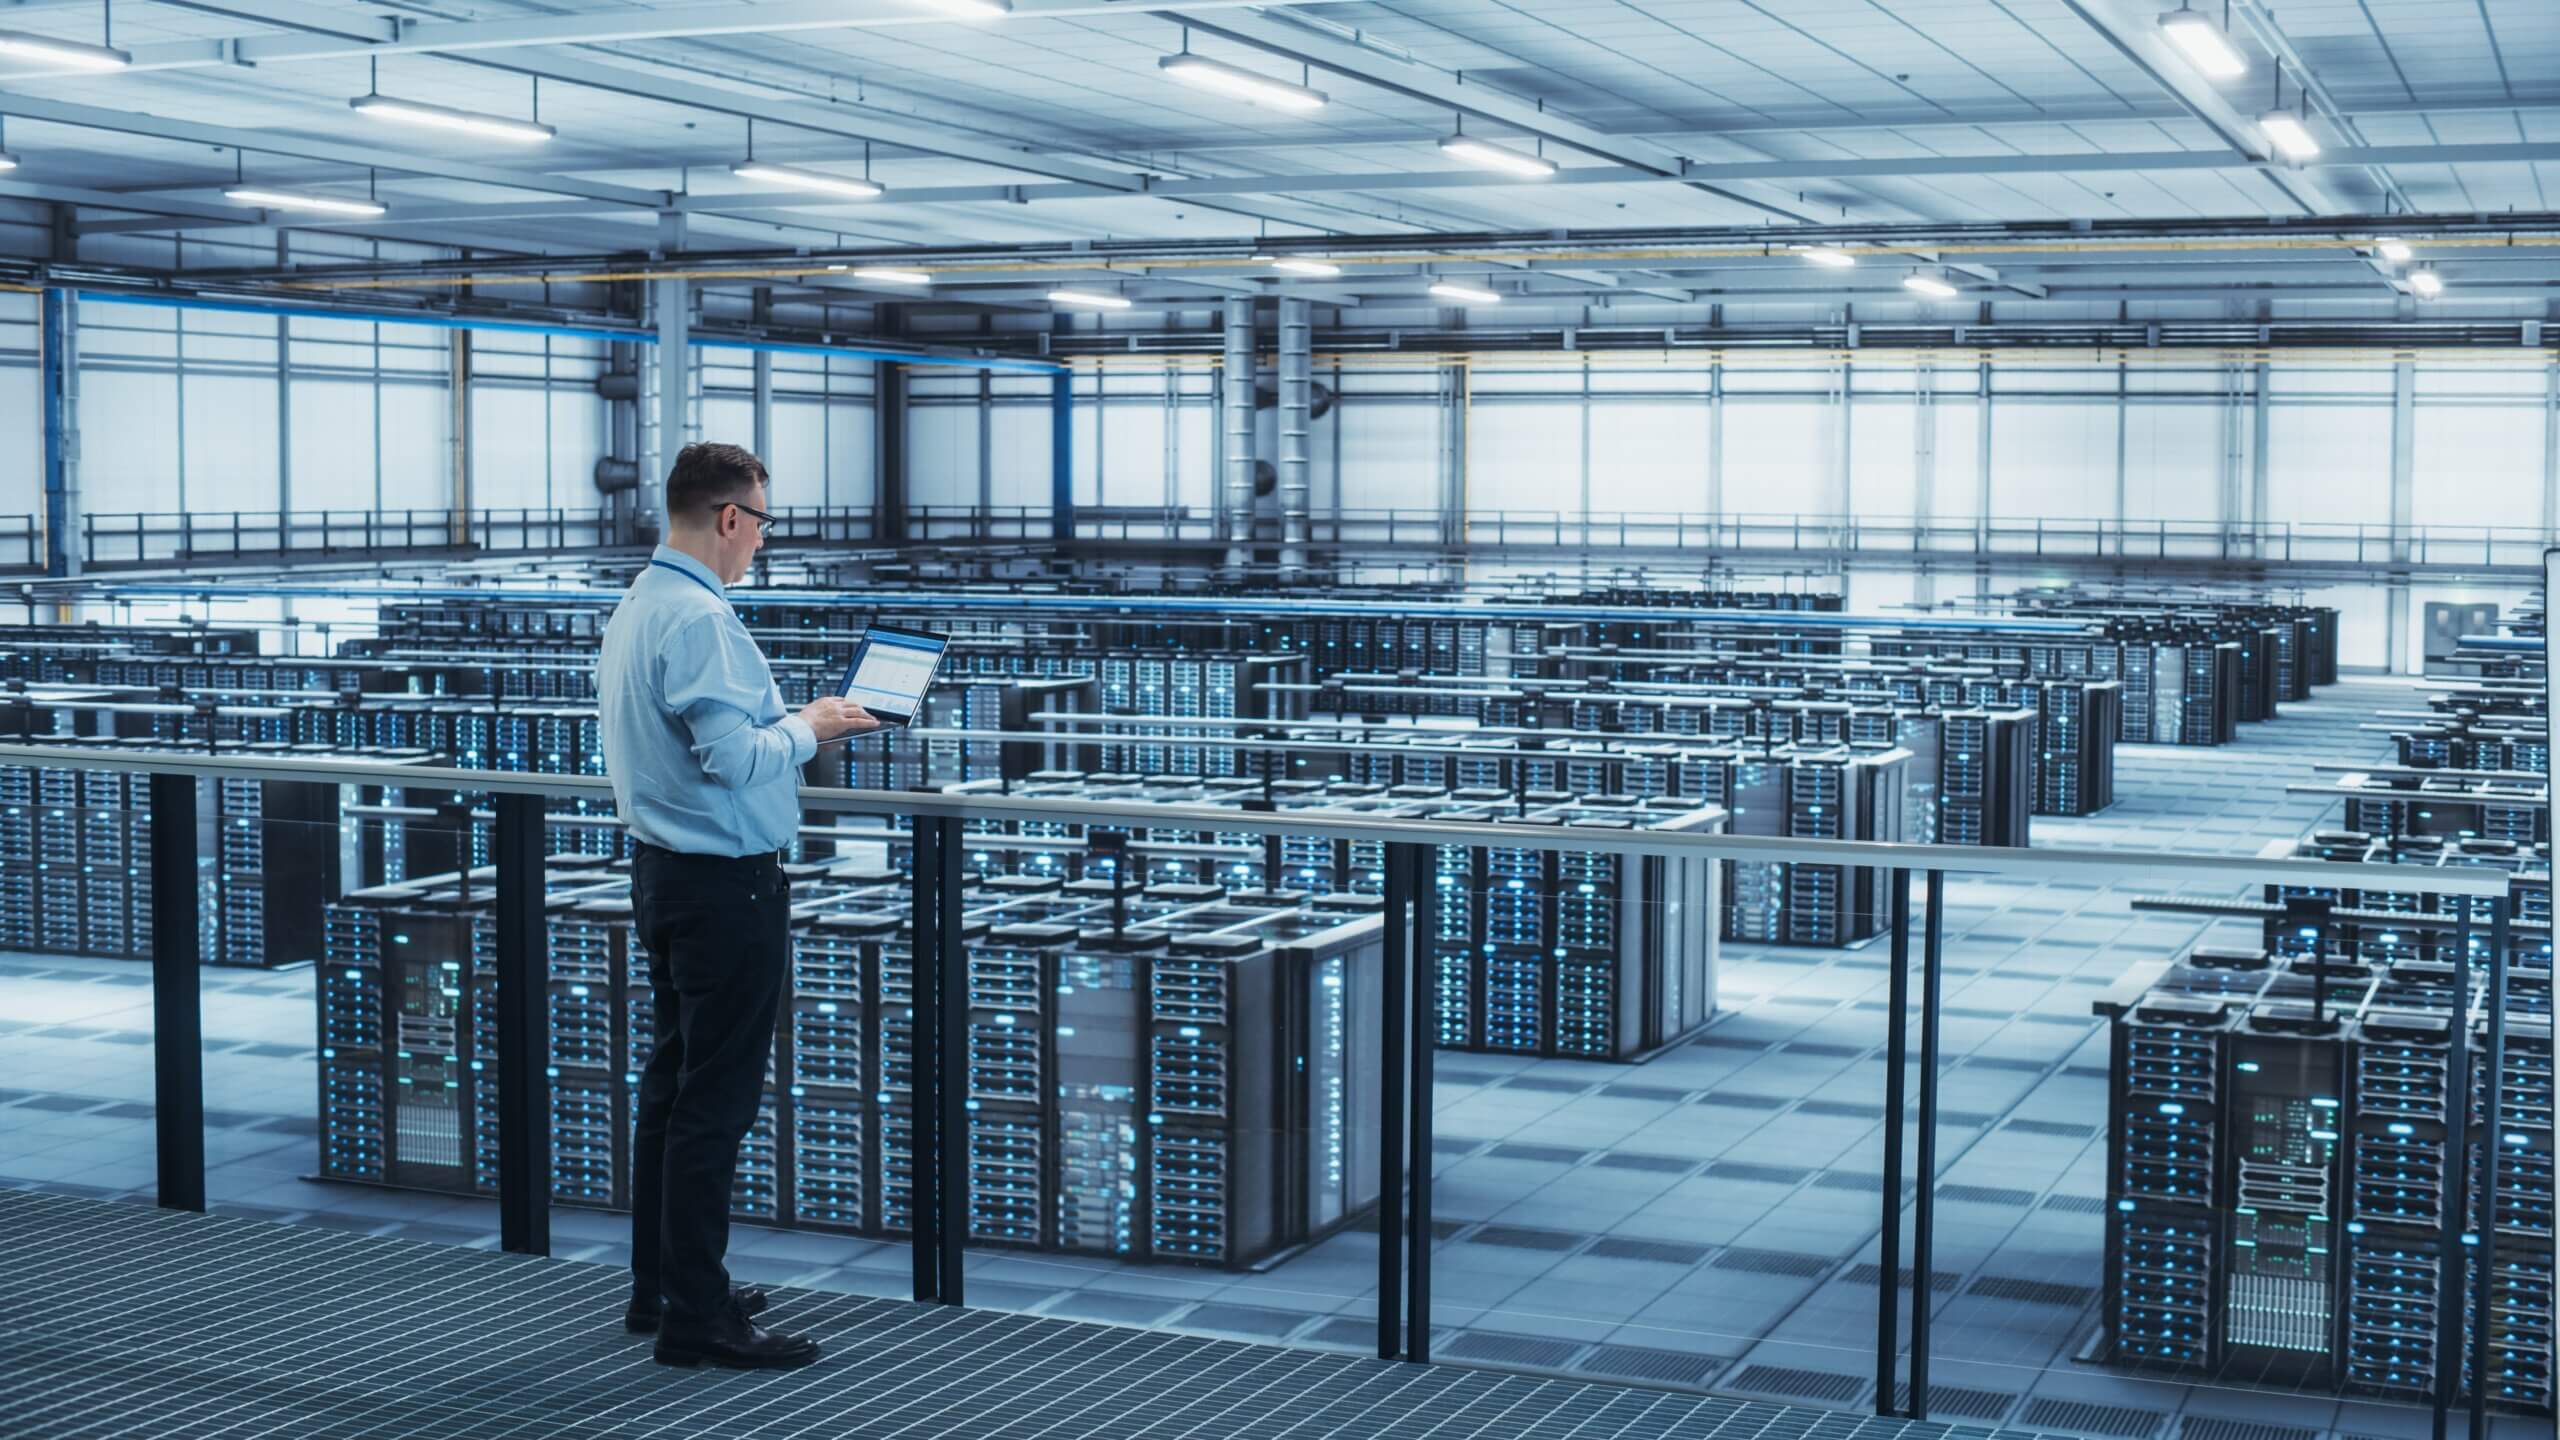 Do we have enough data centers to meet the demand?